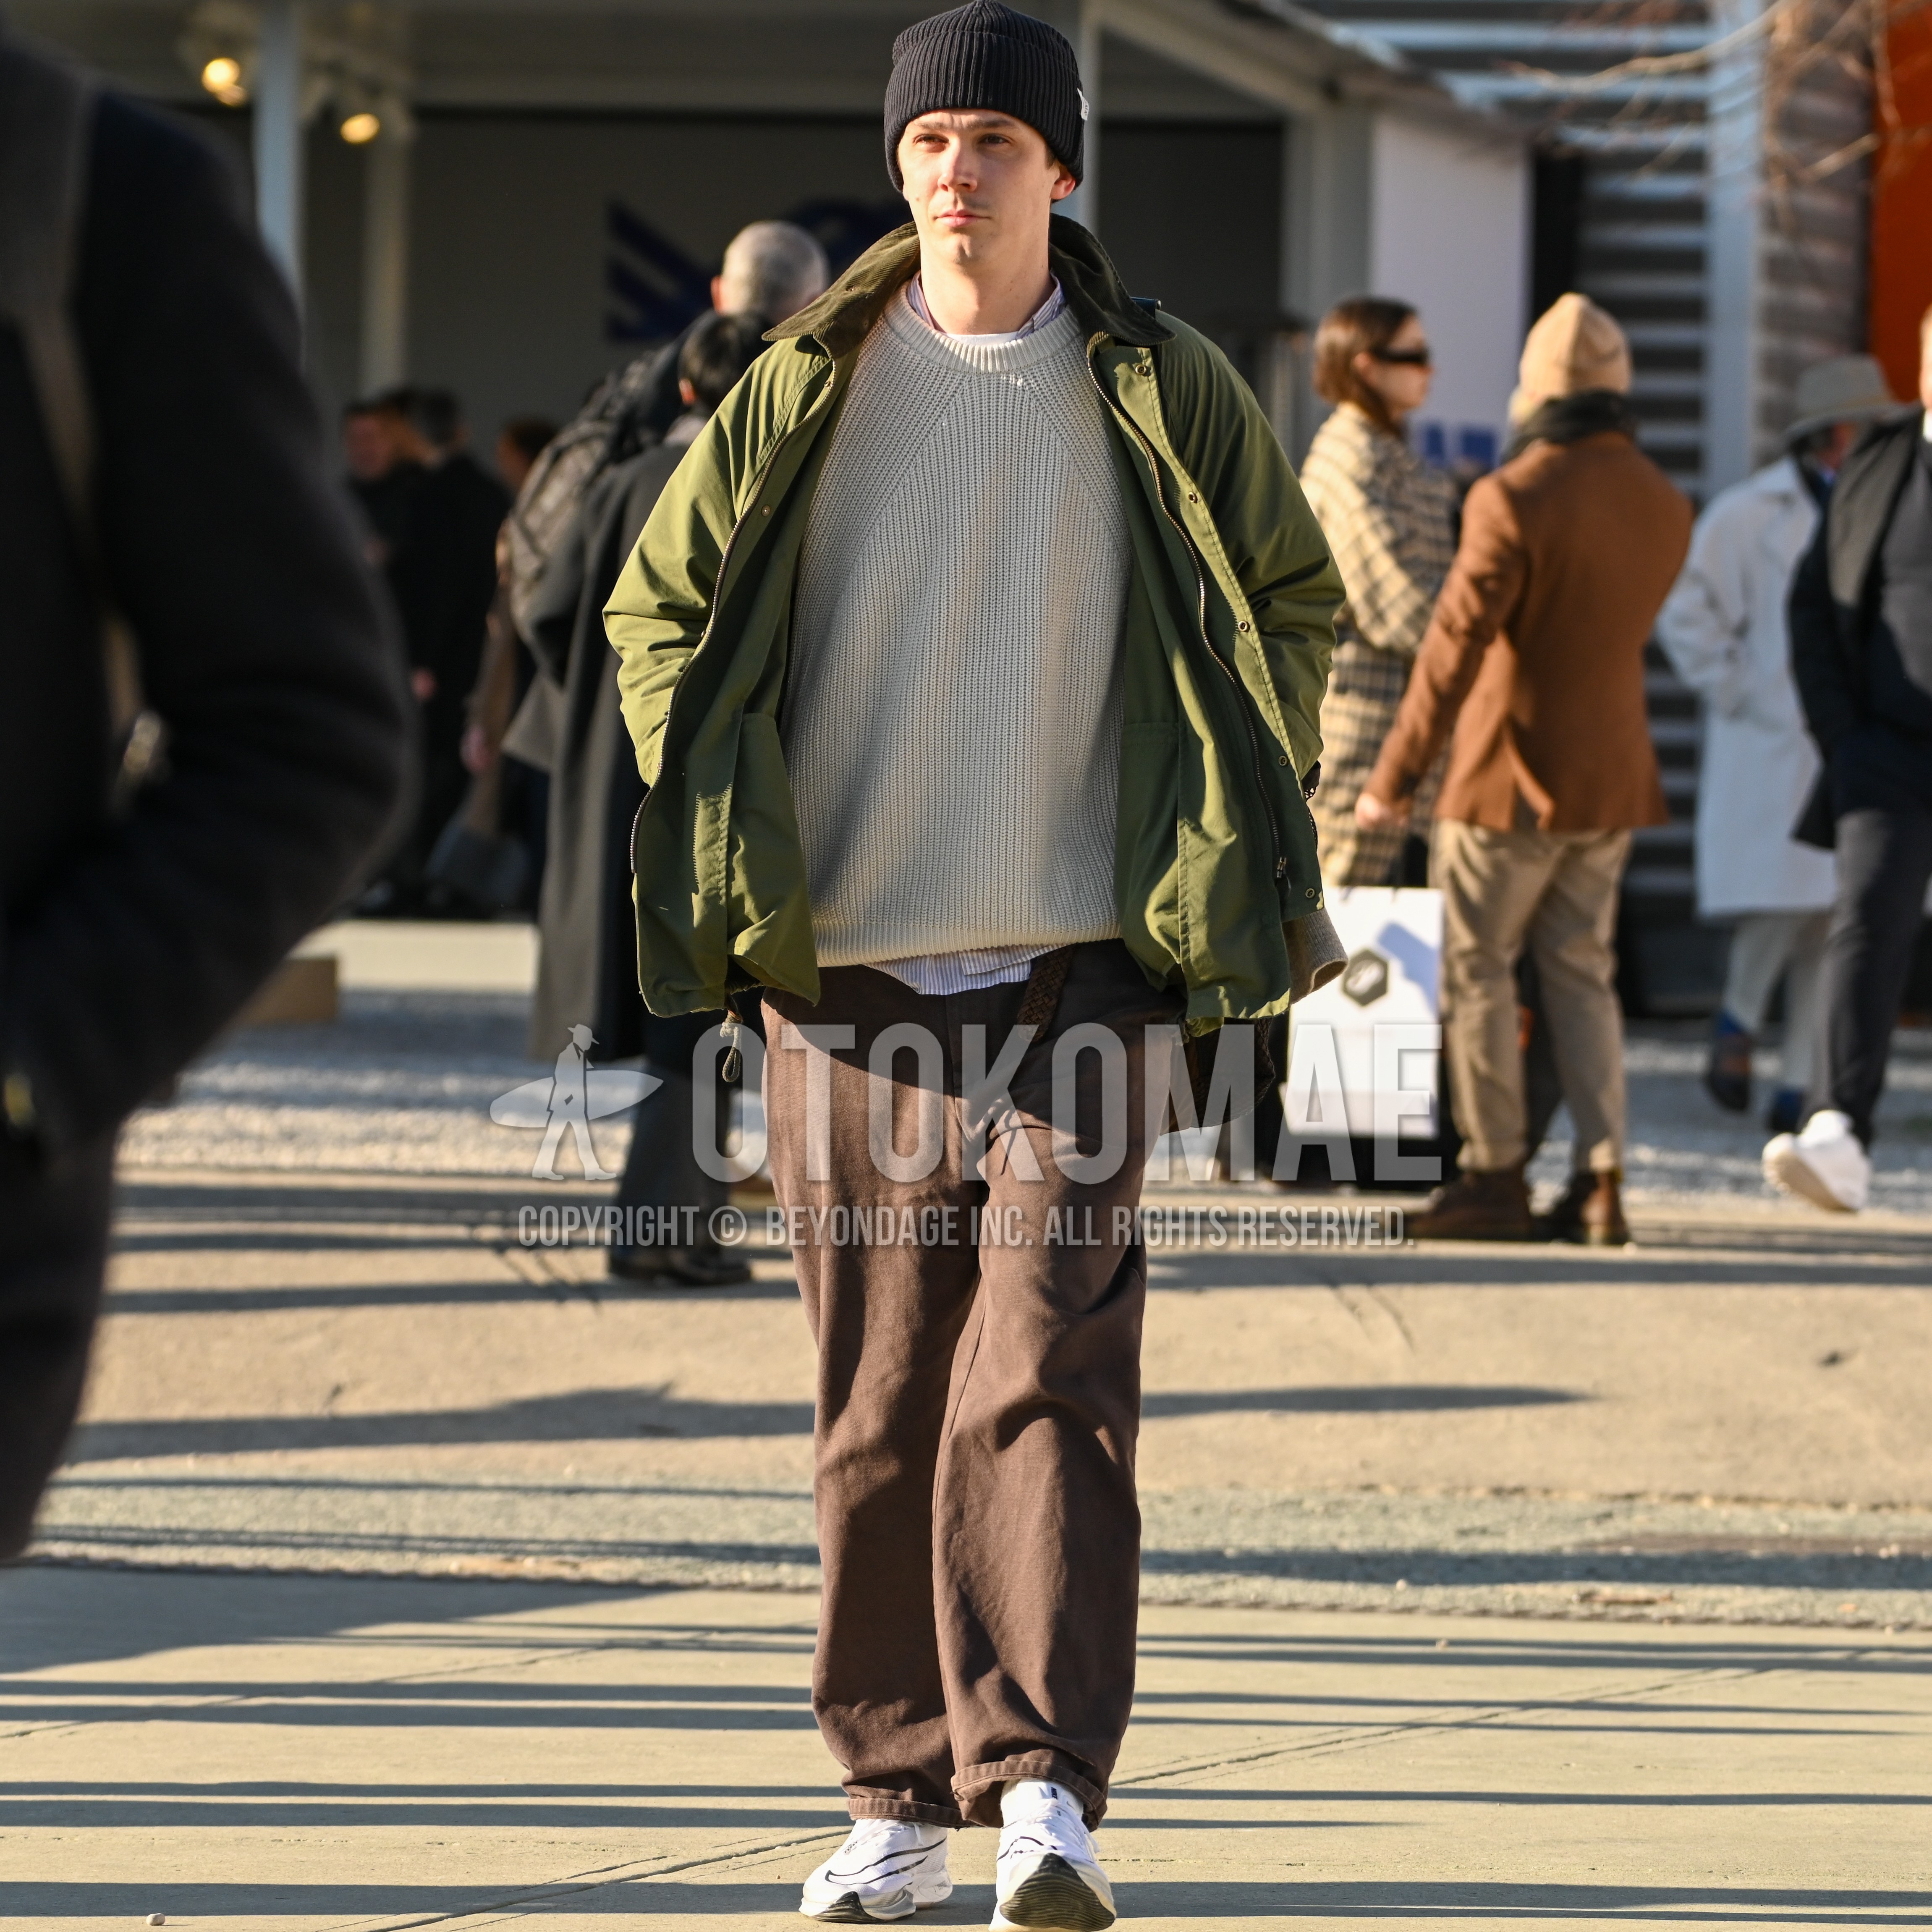 Men's autumn winter outfit with black one point knit cap, olive green outerwear field jacket/hunting jacket, stripes shirt, beige plain sweater, brown belt leather belt, brown plain denim/jeans, white low-cut sneakers.